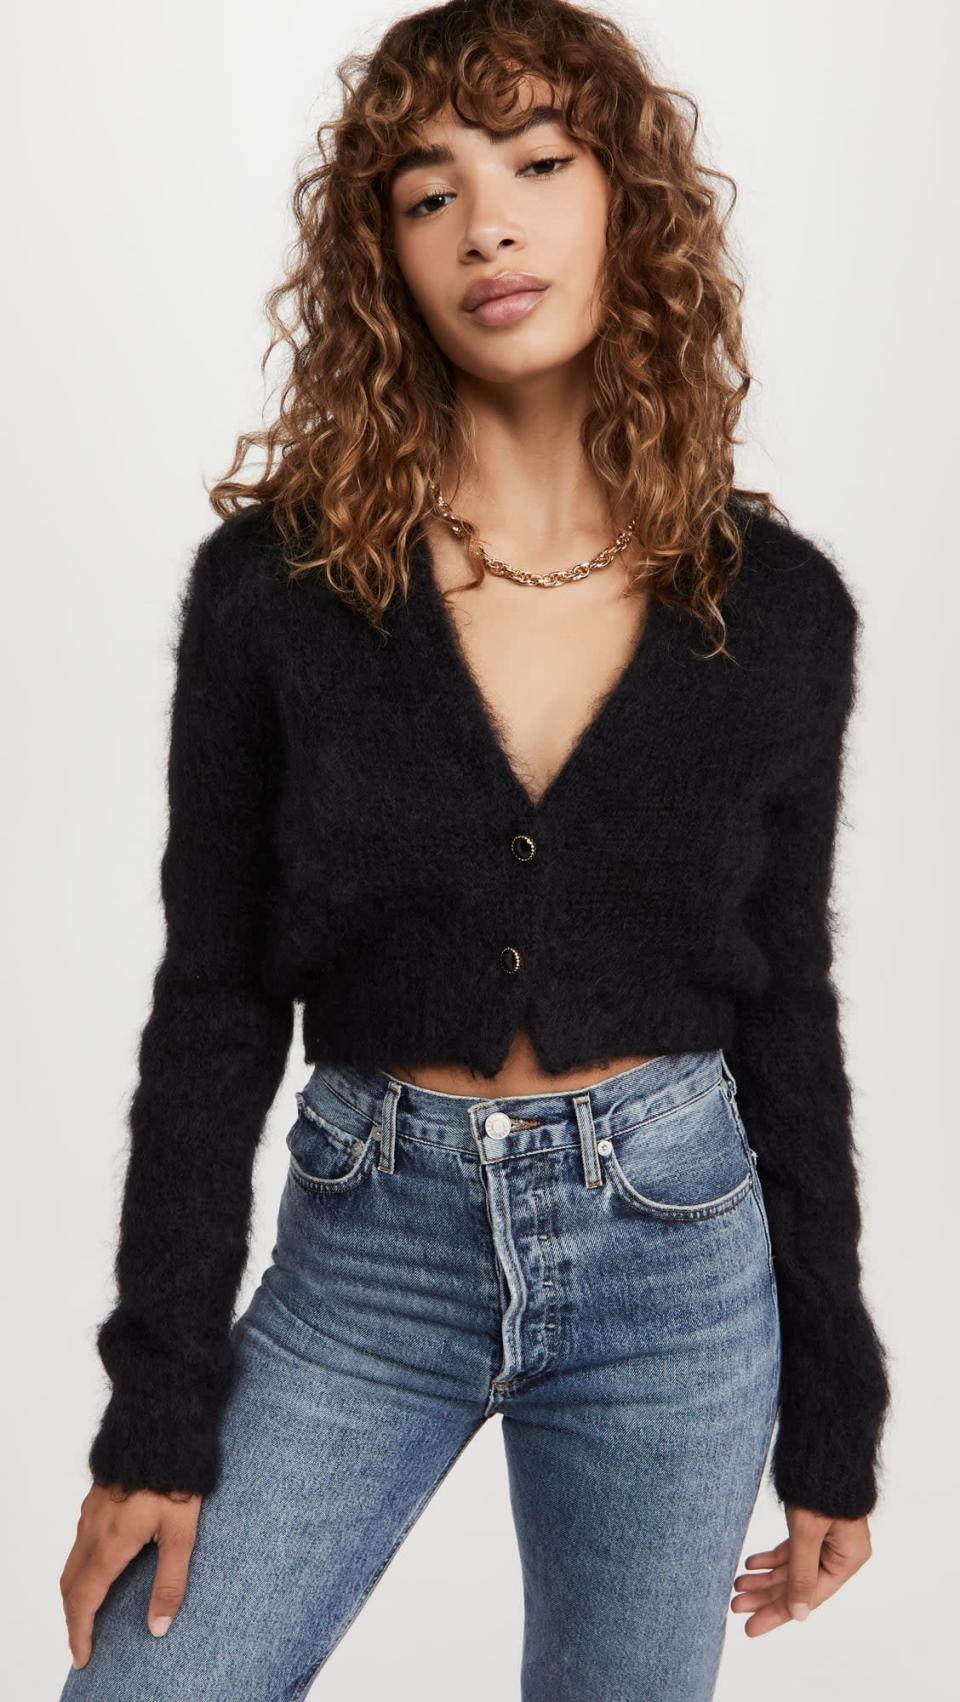 <p>Get yourself something designer for the winter with this <span>Marc Jacobs Hairy Cropped Mohair Cardigan</span> ($263, originally $375). The cropped silhouette is modern, while the fabric is soft and cold-weather friendly. You really can't go wrong wearing it everywhere.</p>